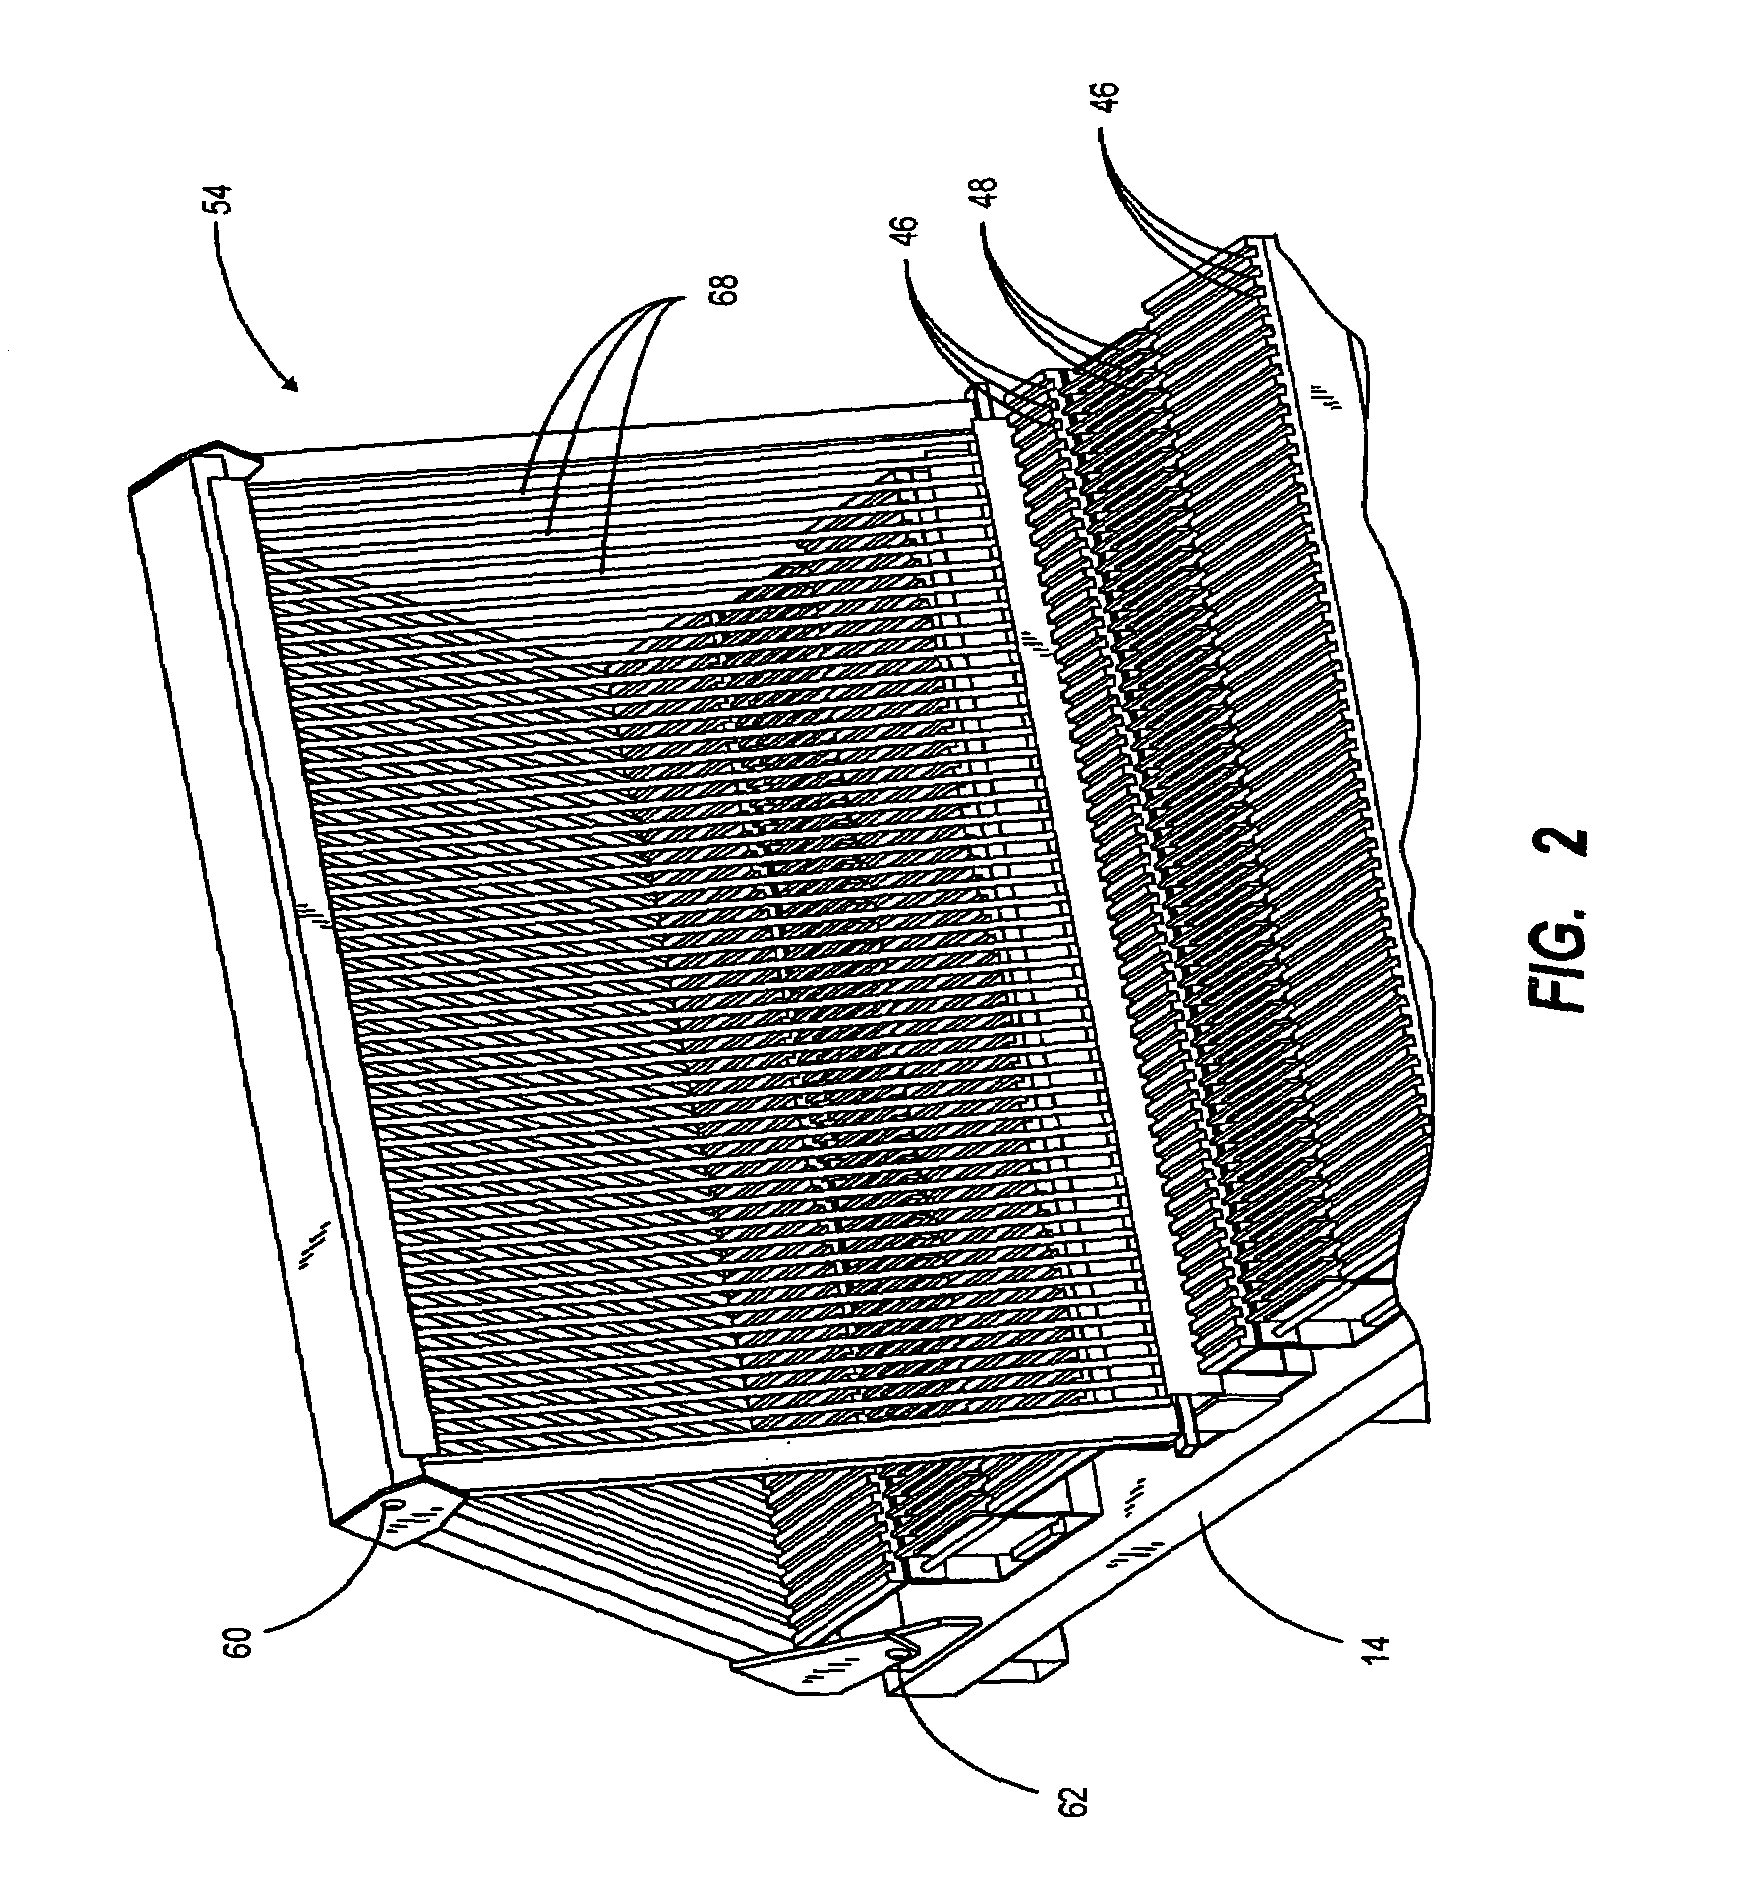 Rack for holding plate glass and other planar articles